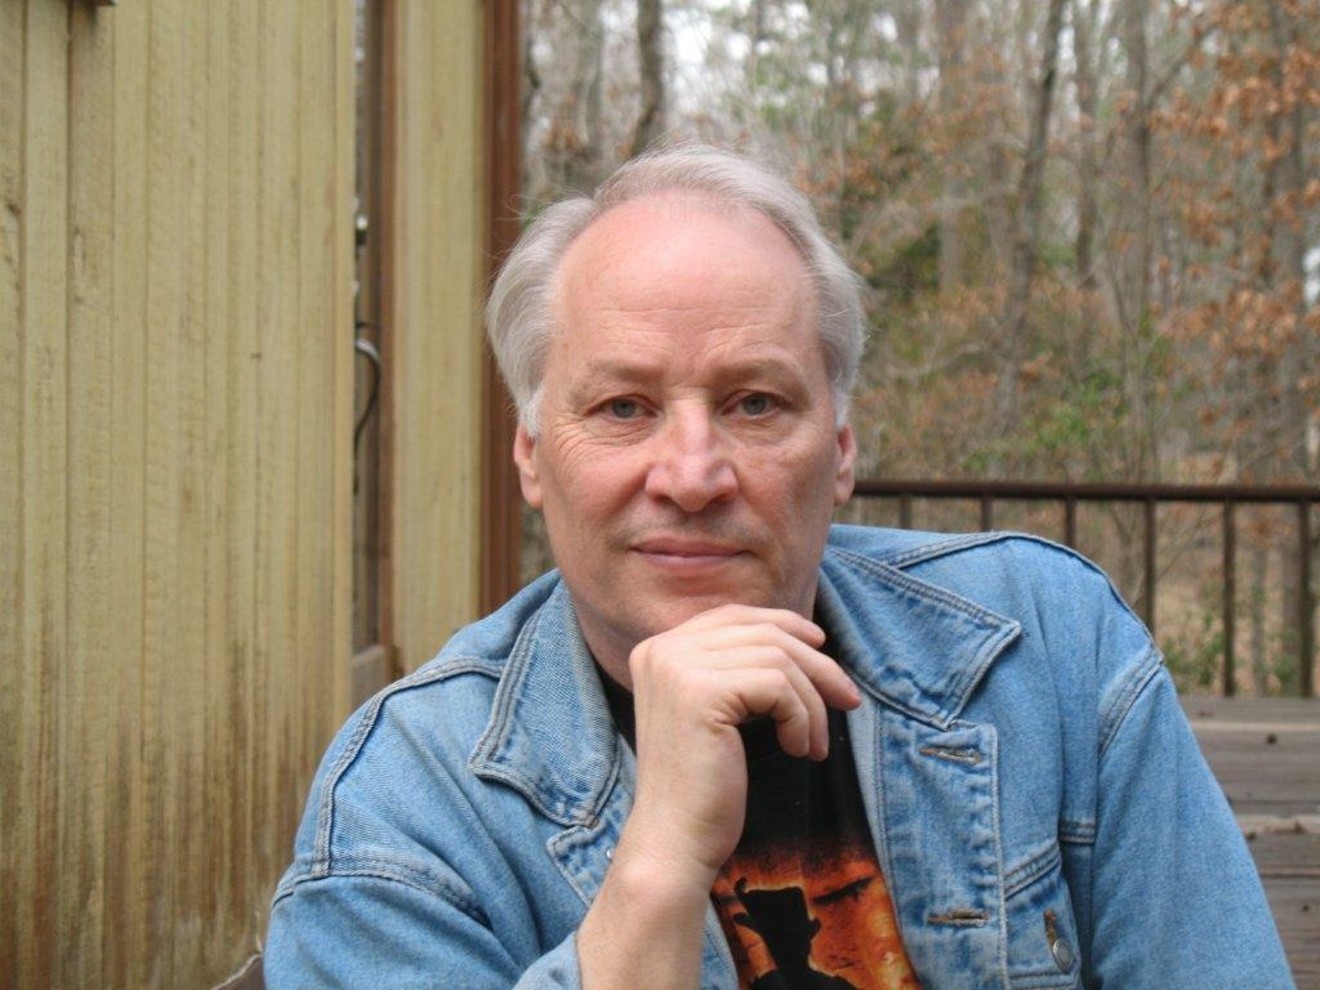 Author Joe R. Lansdale will be in Houston February 22 to discuss and sign the latest in his Hap and Leonard series, Rusty Puppy.